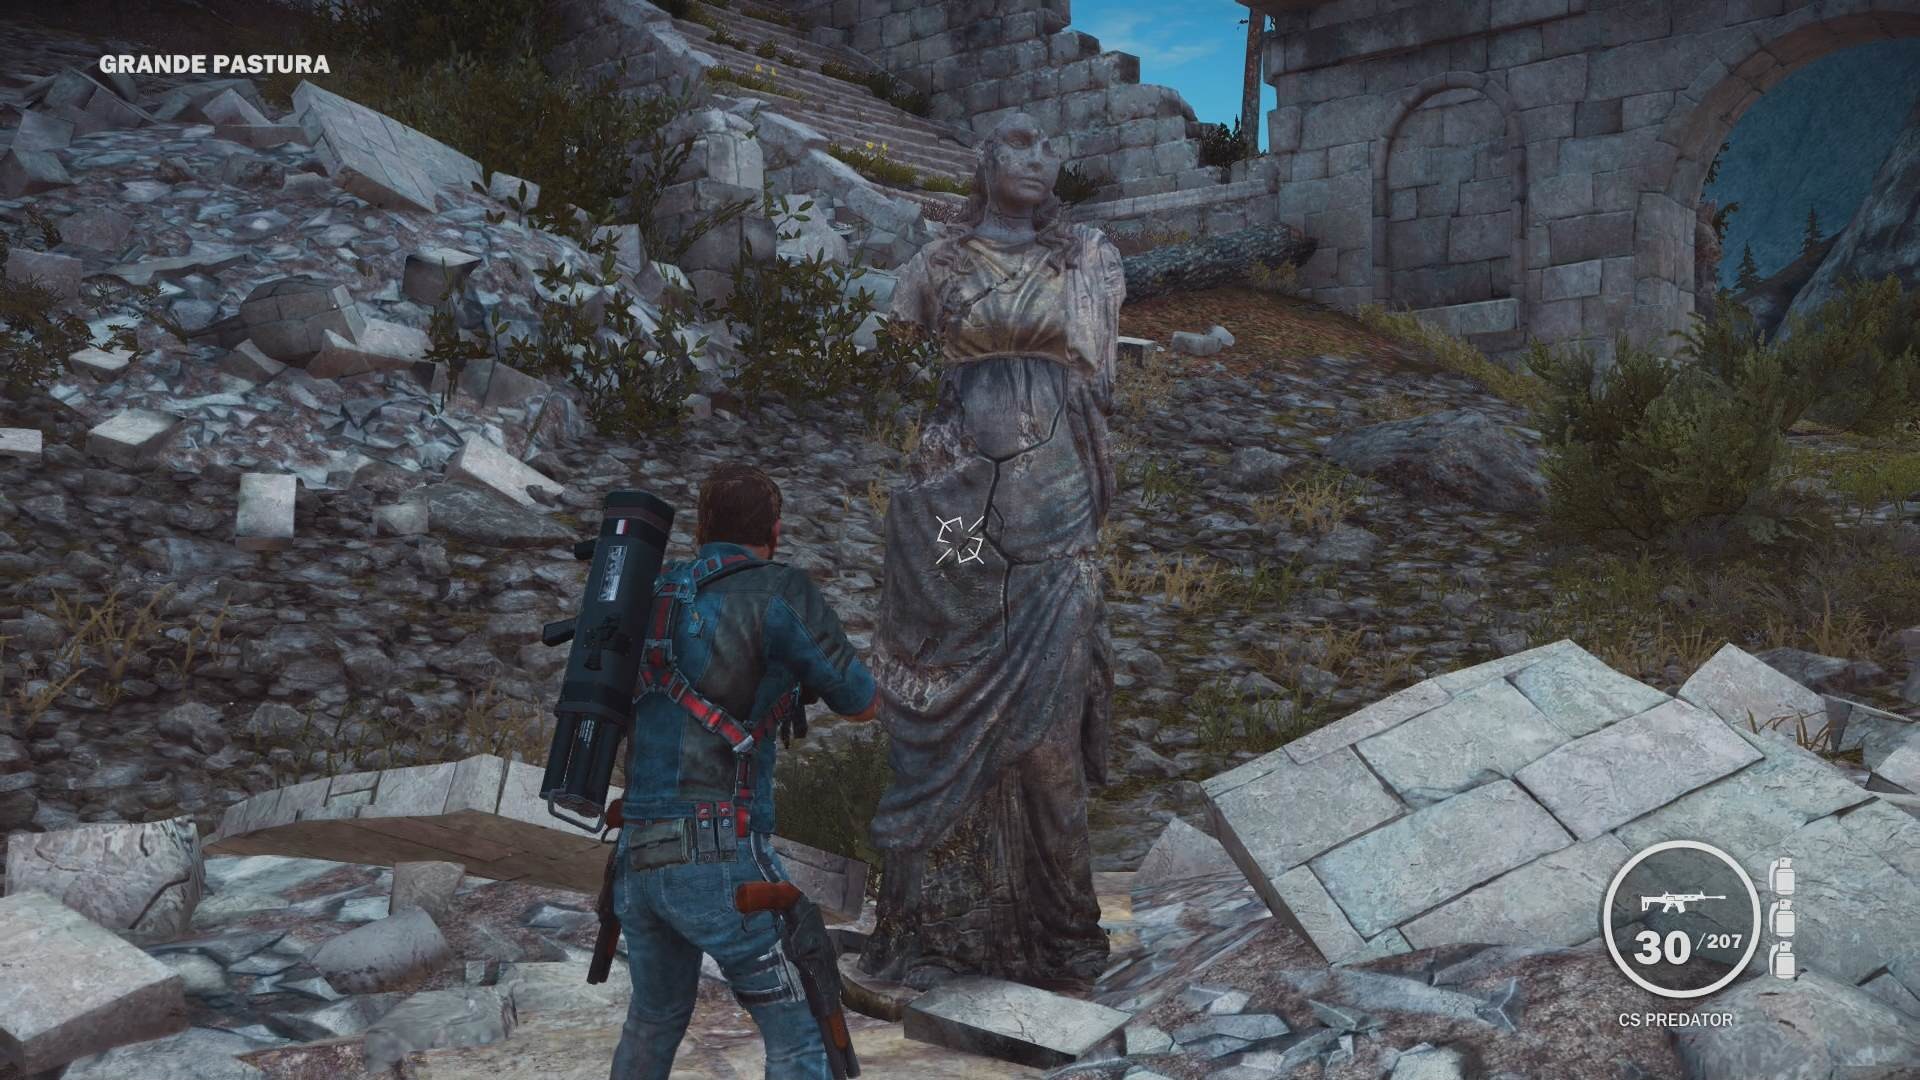 1920x1080 Eleven Great Videogame Easter Eggs From 2014/15 Just Cause 3 Dr. Who Weeping